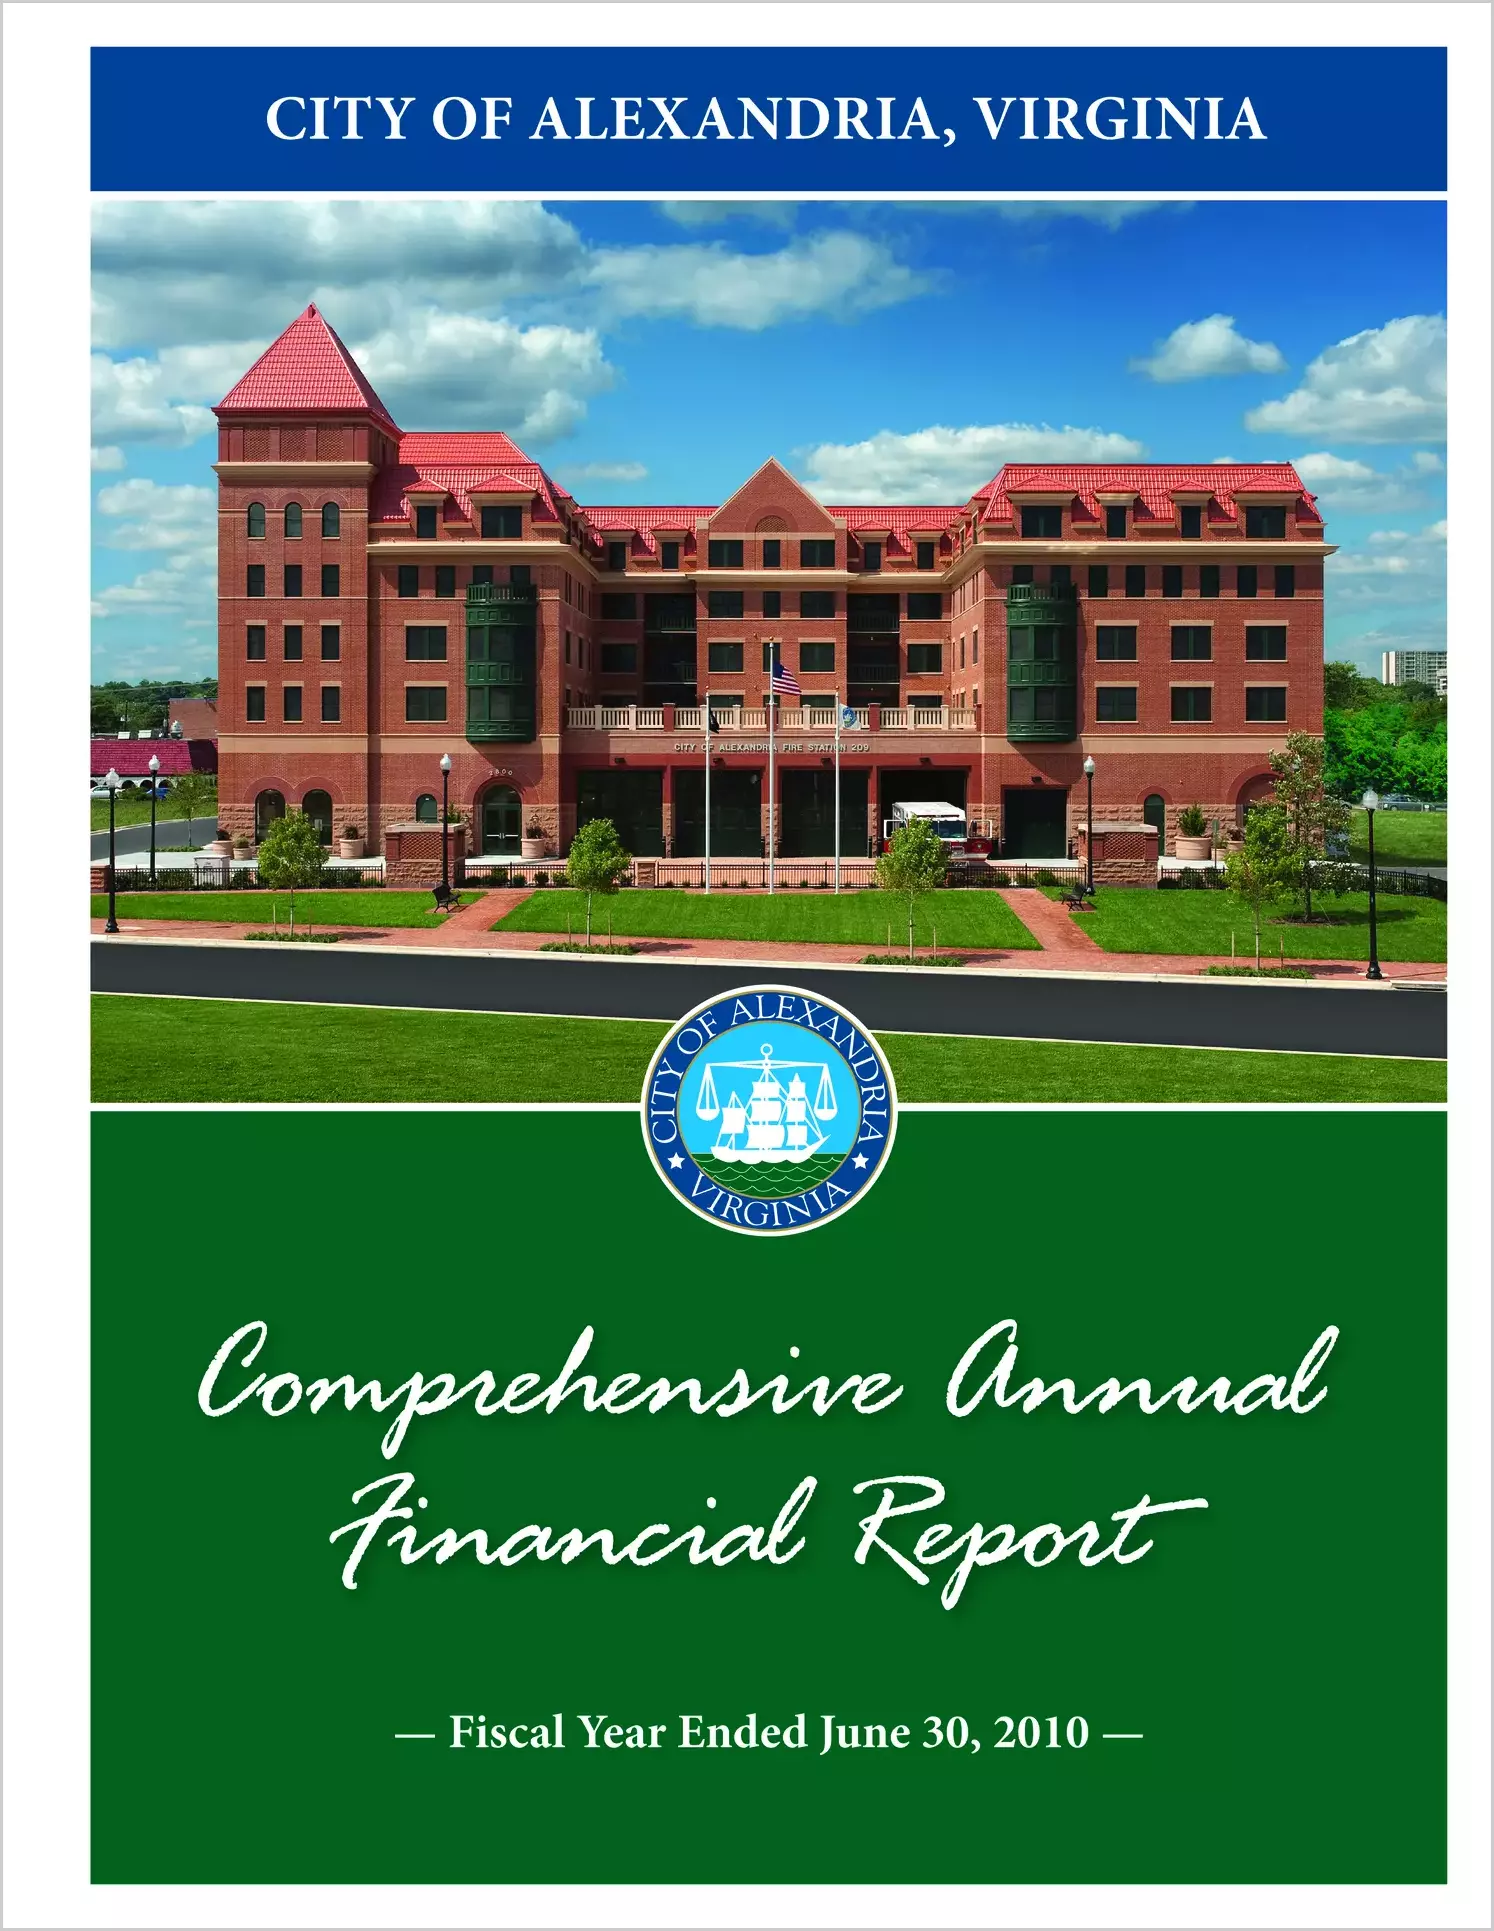 2010 Annual Financial Report for City of Alexandria